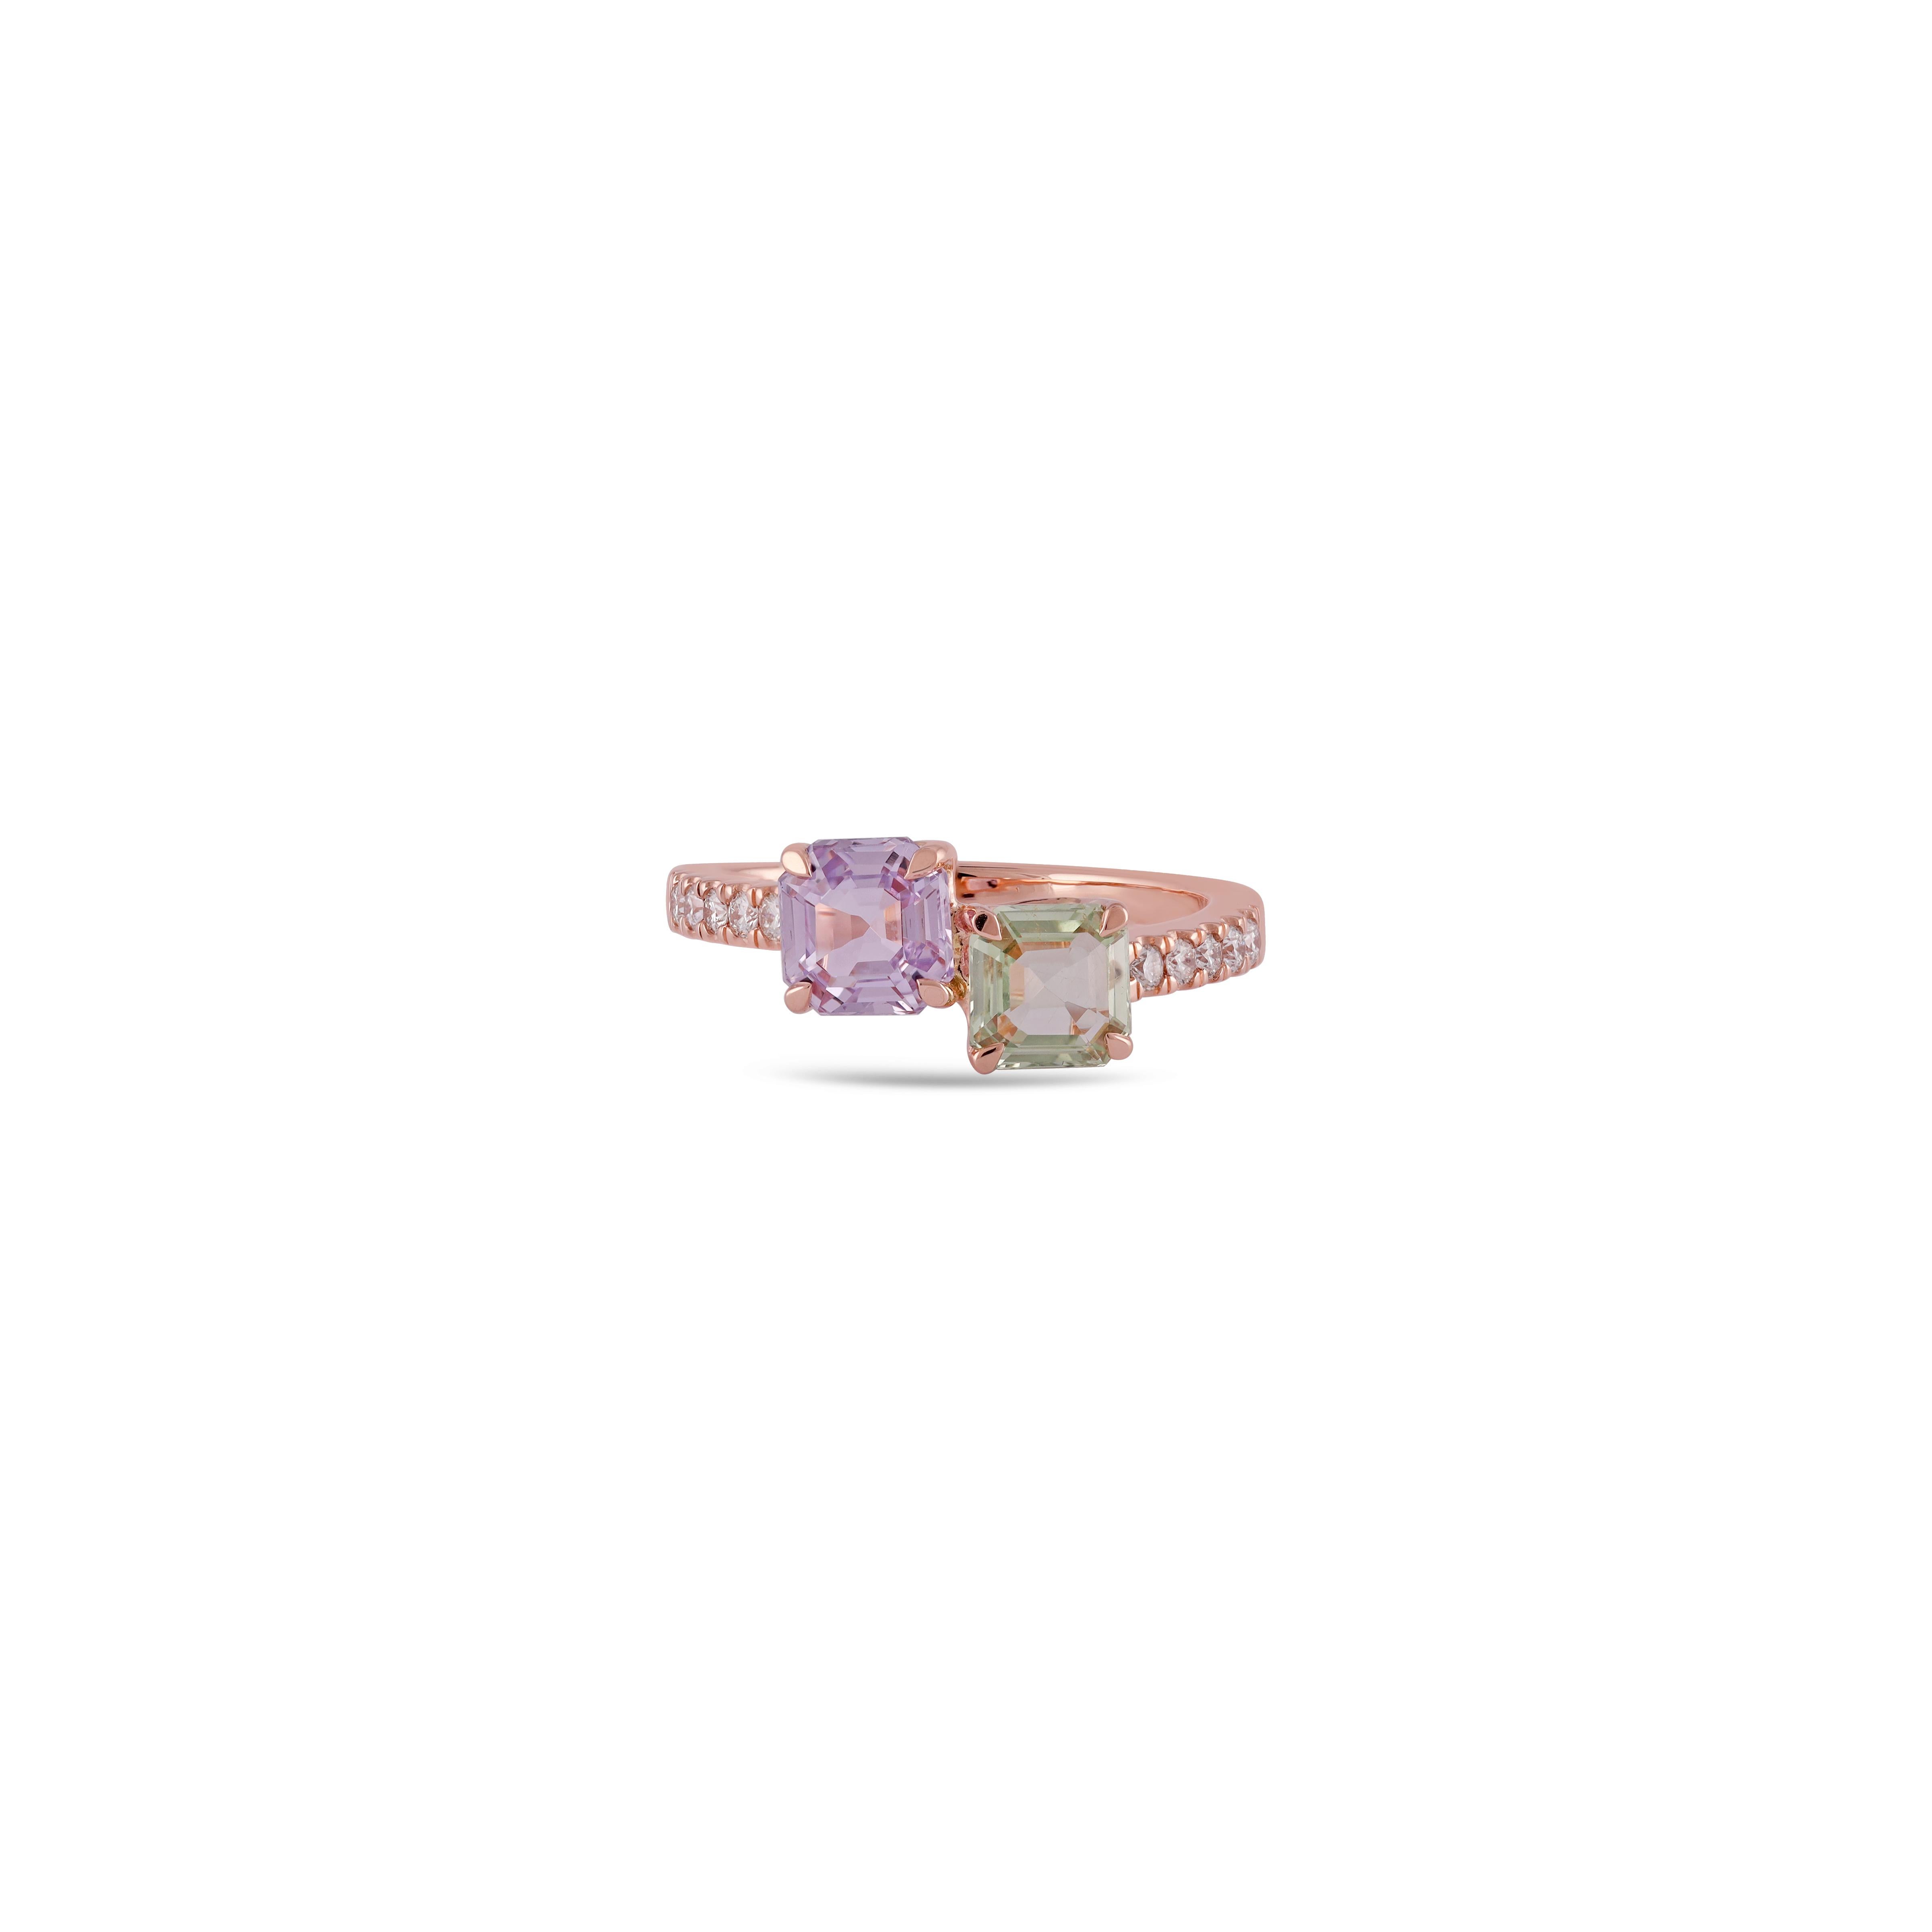 If you are looking for Multi Sapphire Ring, this is the ultimate find, (2.35 carats) of the finest Multi Sapphire color is the focal point  Perfectly matched in color, size, luster, and transparency. The color is what you want. The diamonds 